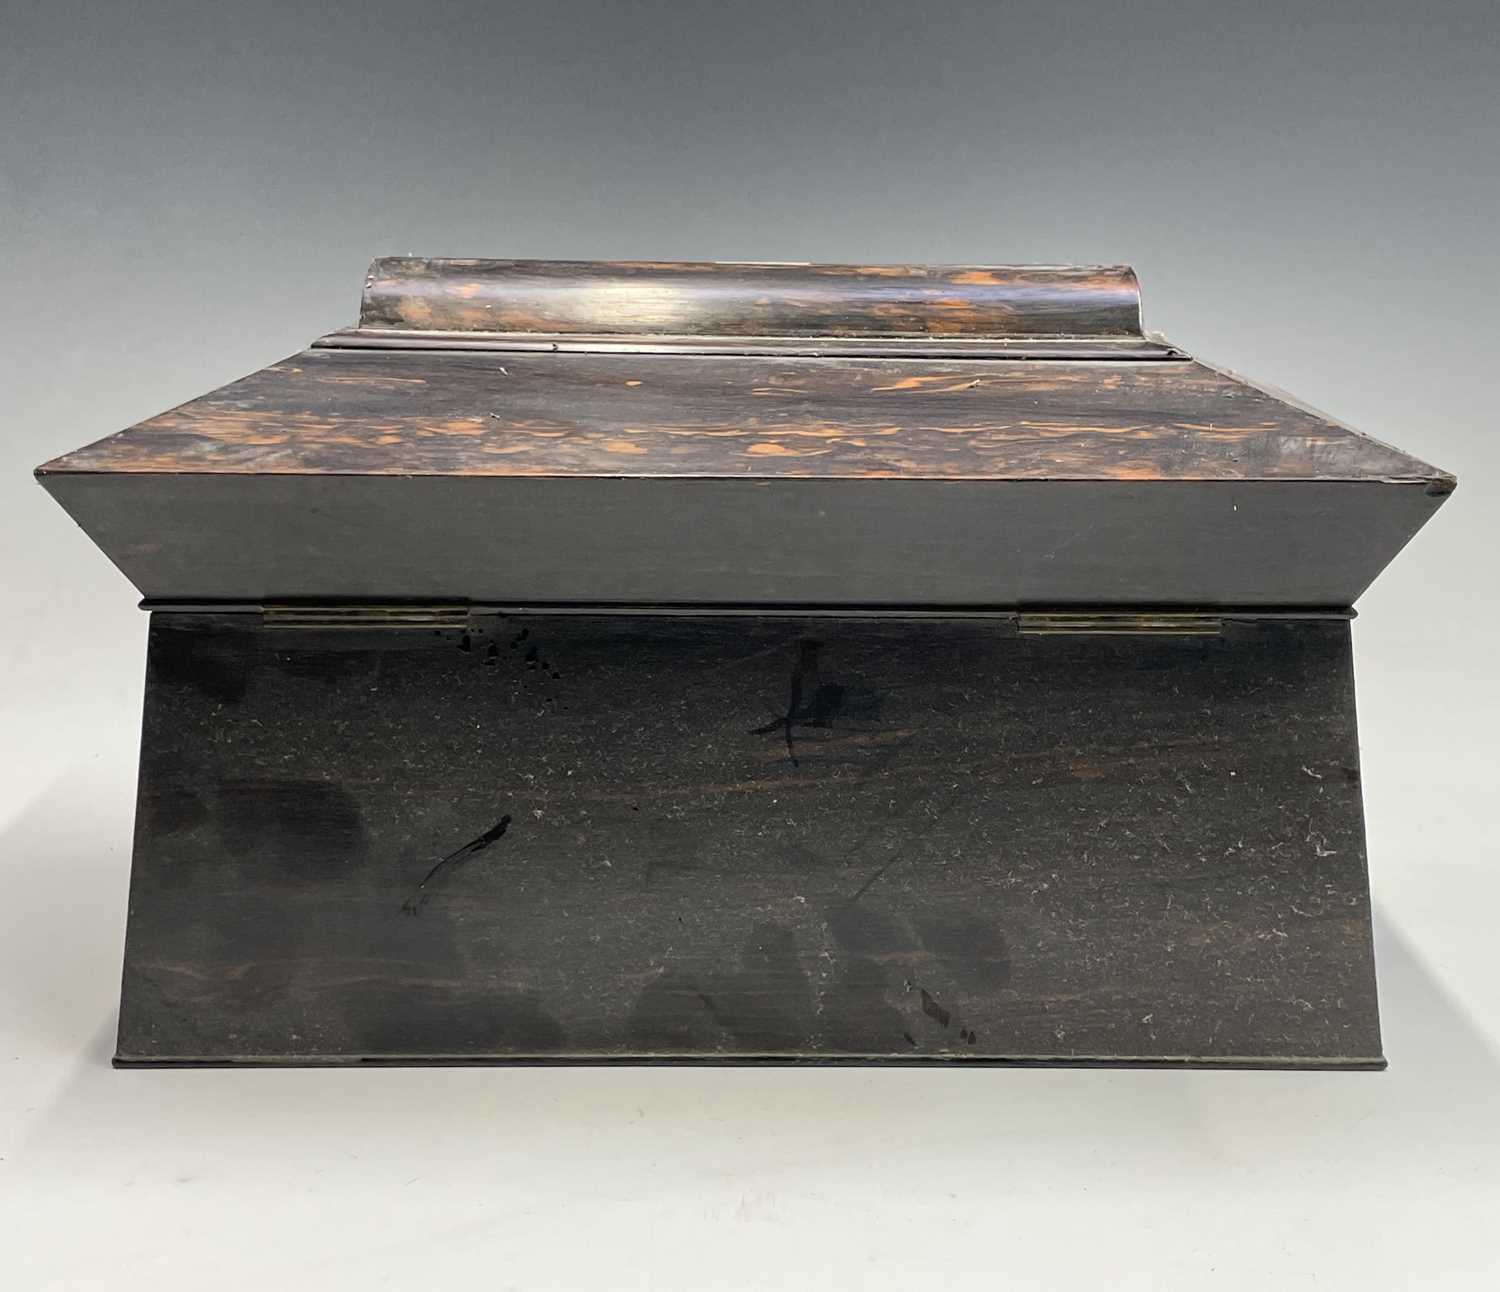 An early Victorian coromandel wood tea caddy, of sarcophagus shape, with glass mixing bowl and - Image 9 of 9